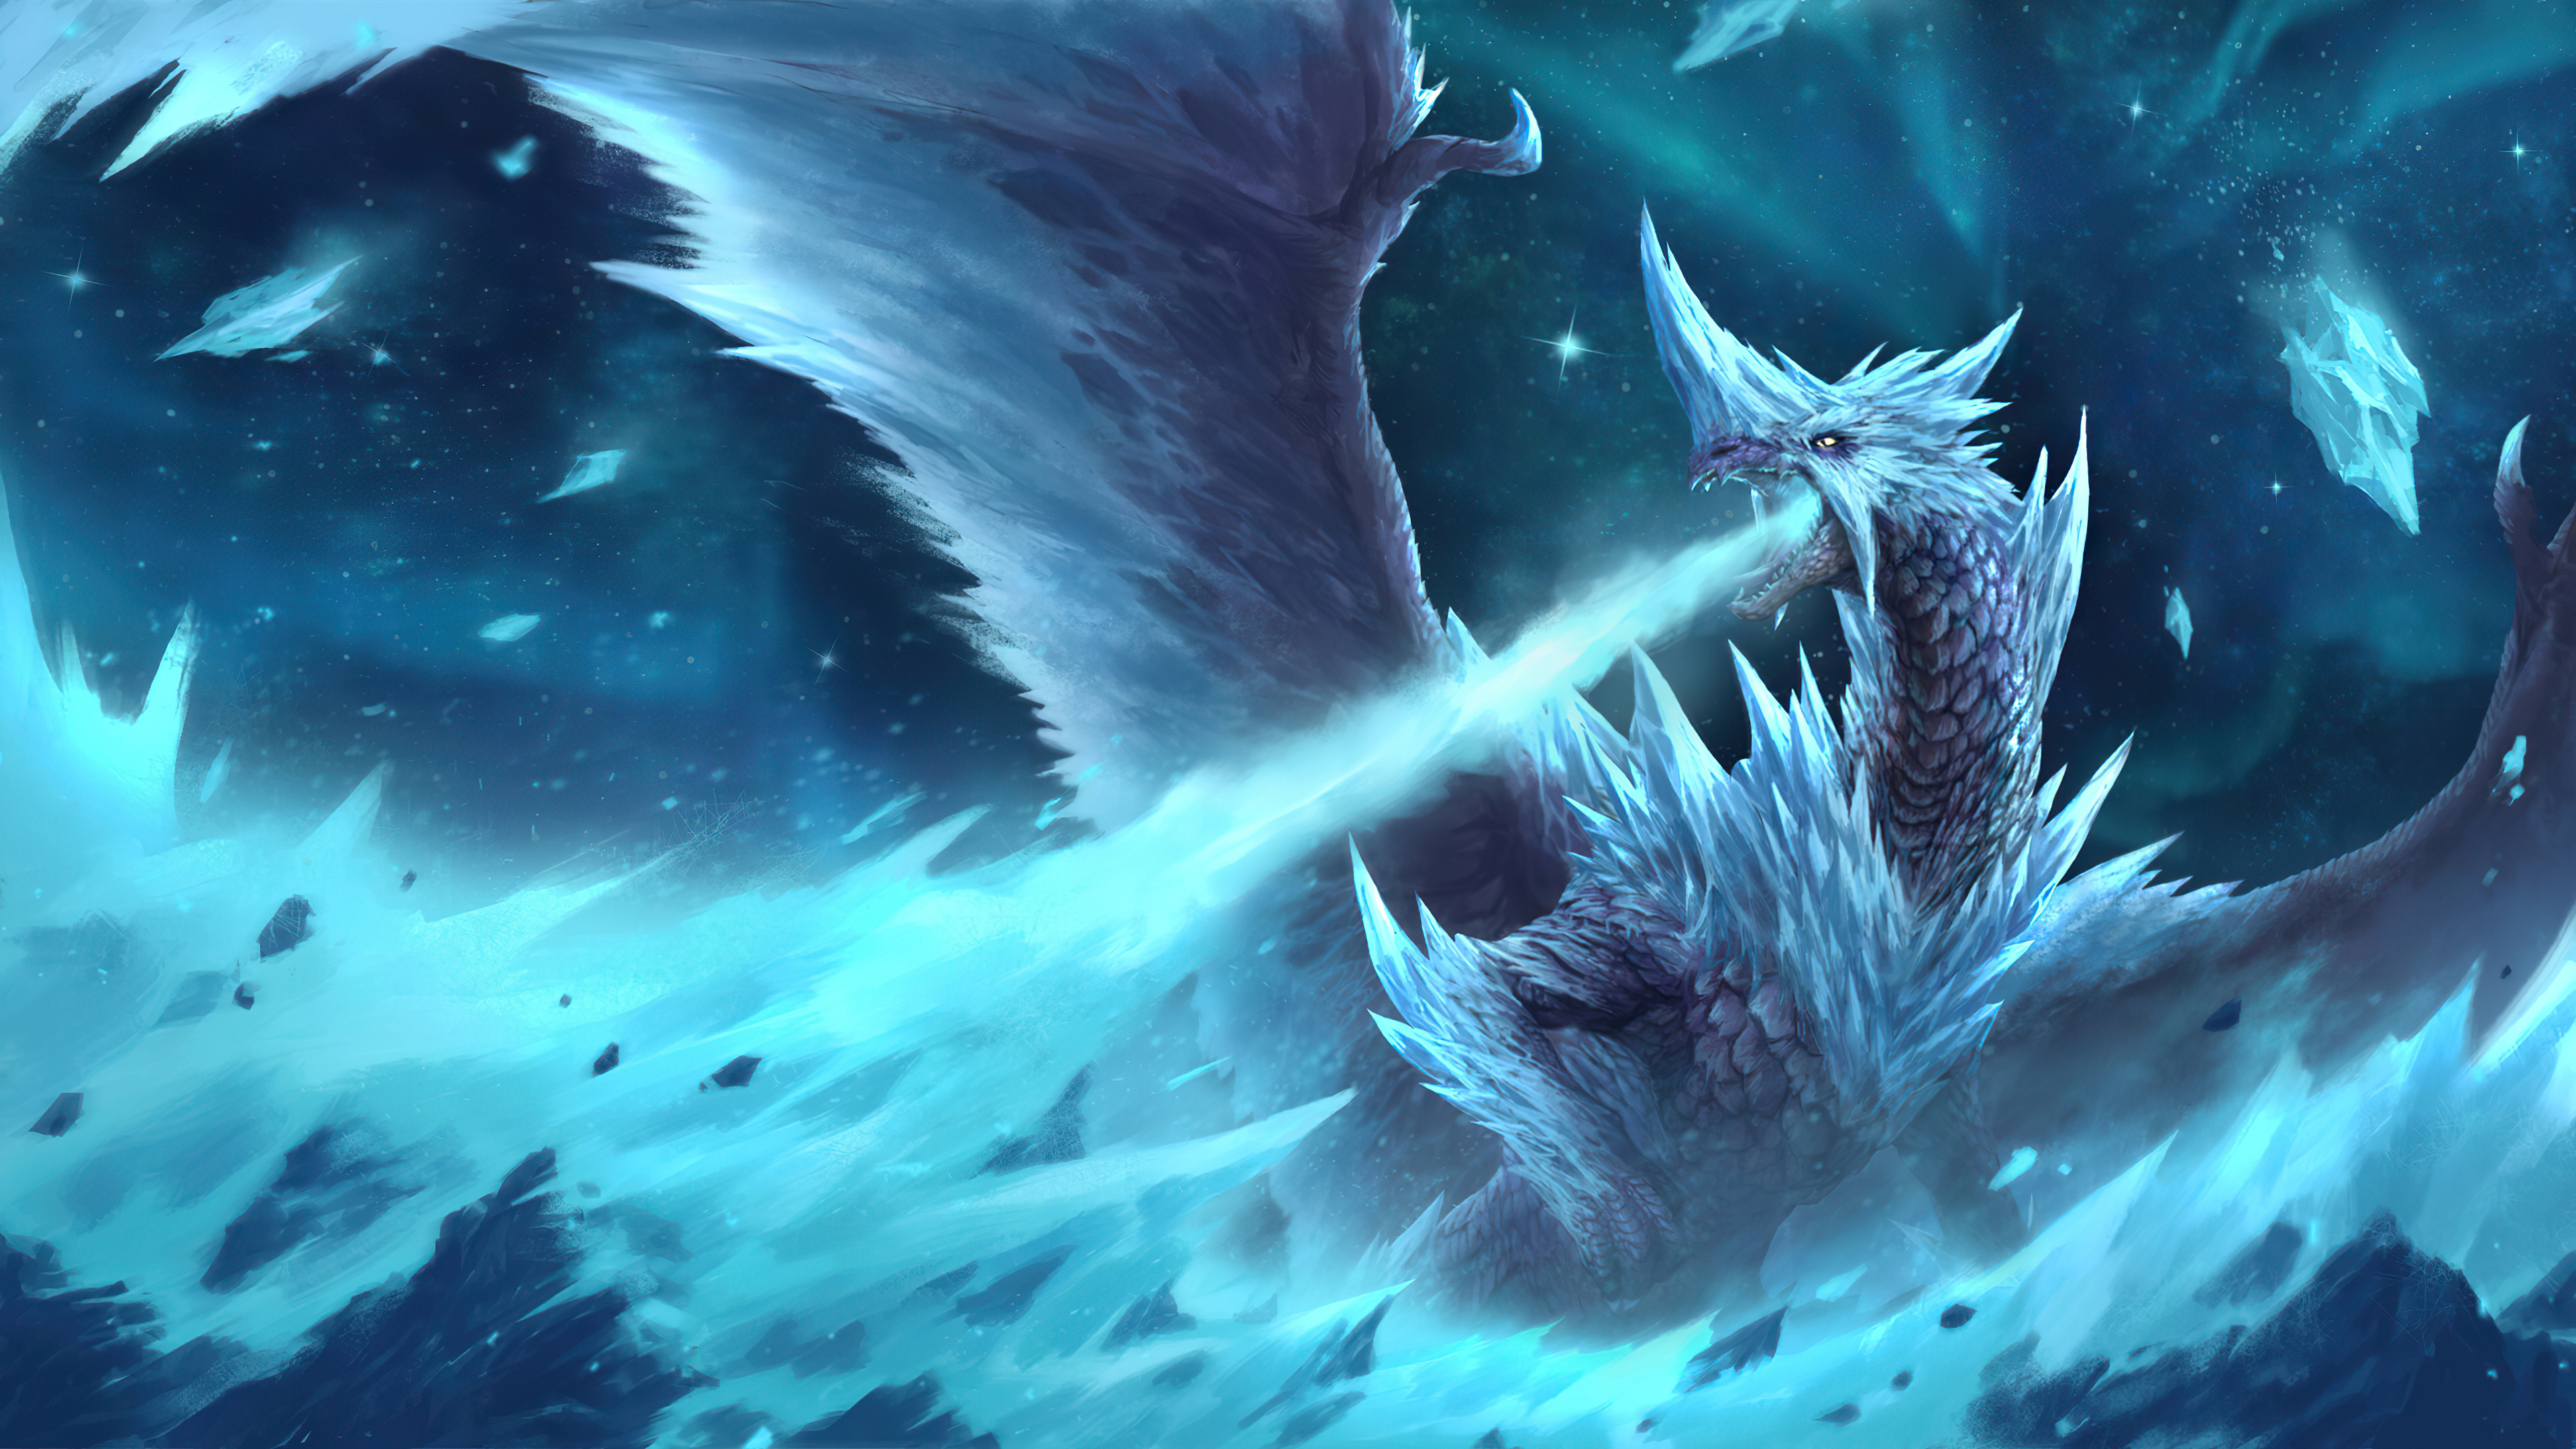 Ice Dragon, 4K HD wallpapers, Mythical creature, Powerful and majestic, 3840x2160 4K Desktop